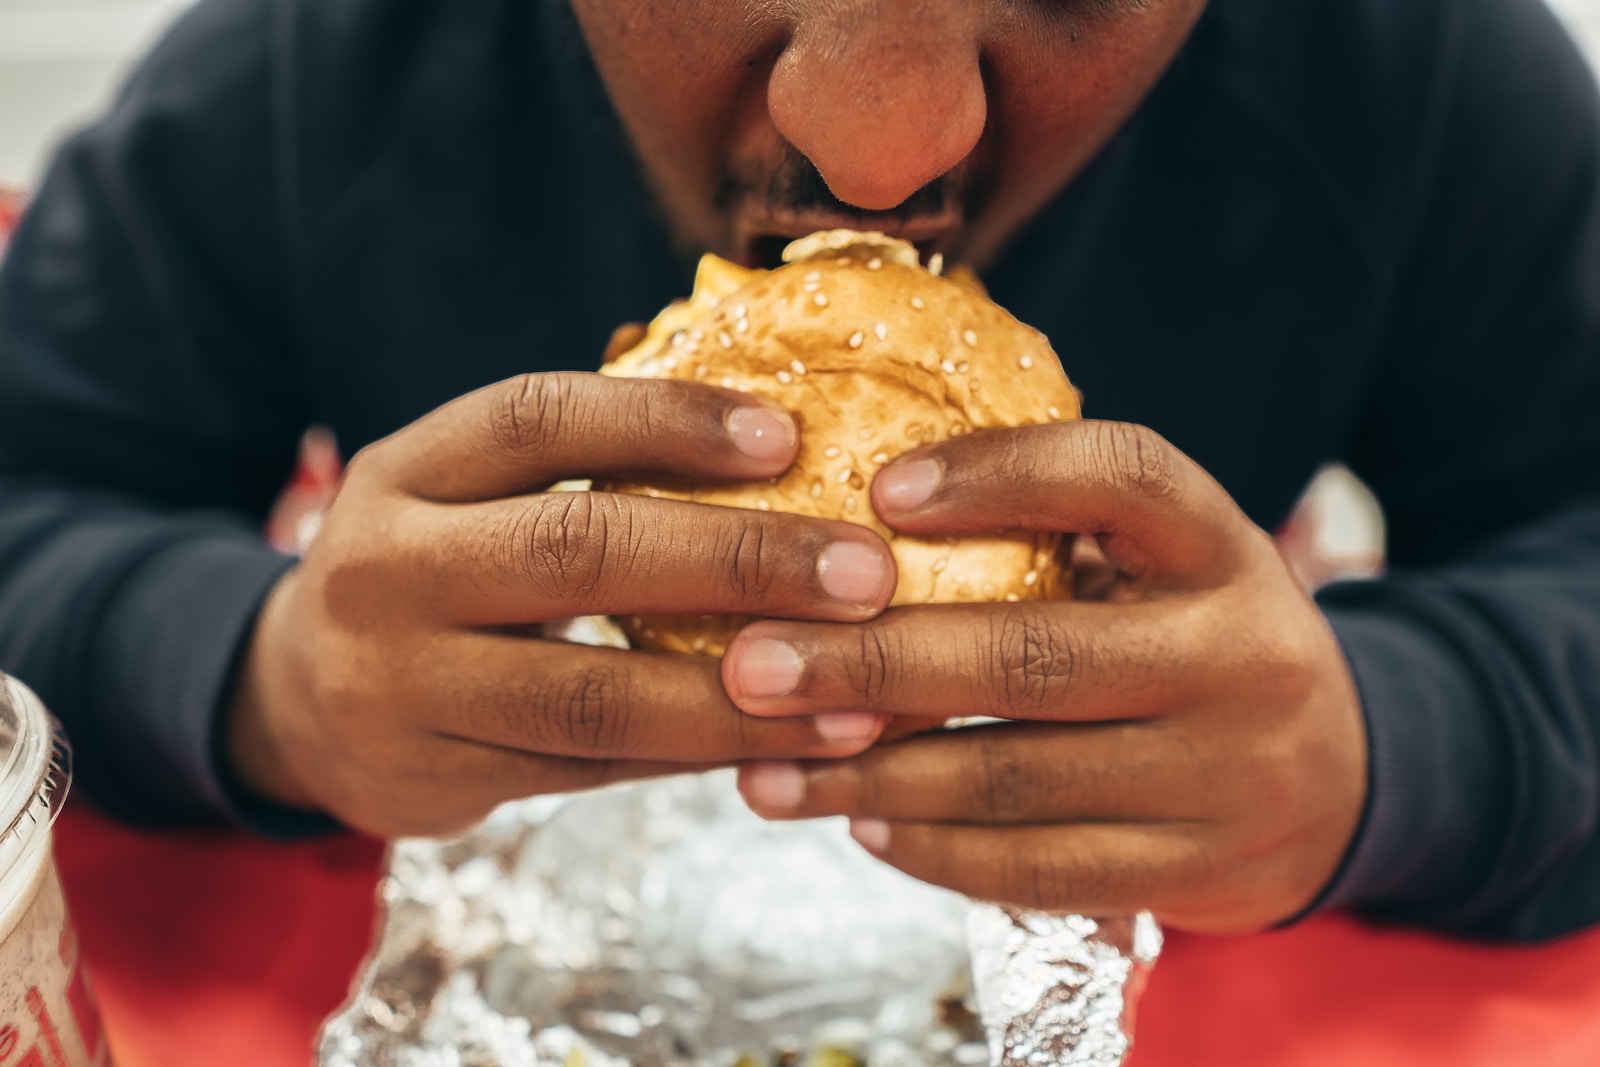 I Can’t Stop Binge Eating!”: Reasons Why Eating Too Much Can Affect Your Mental Health and Physical Wellbeing